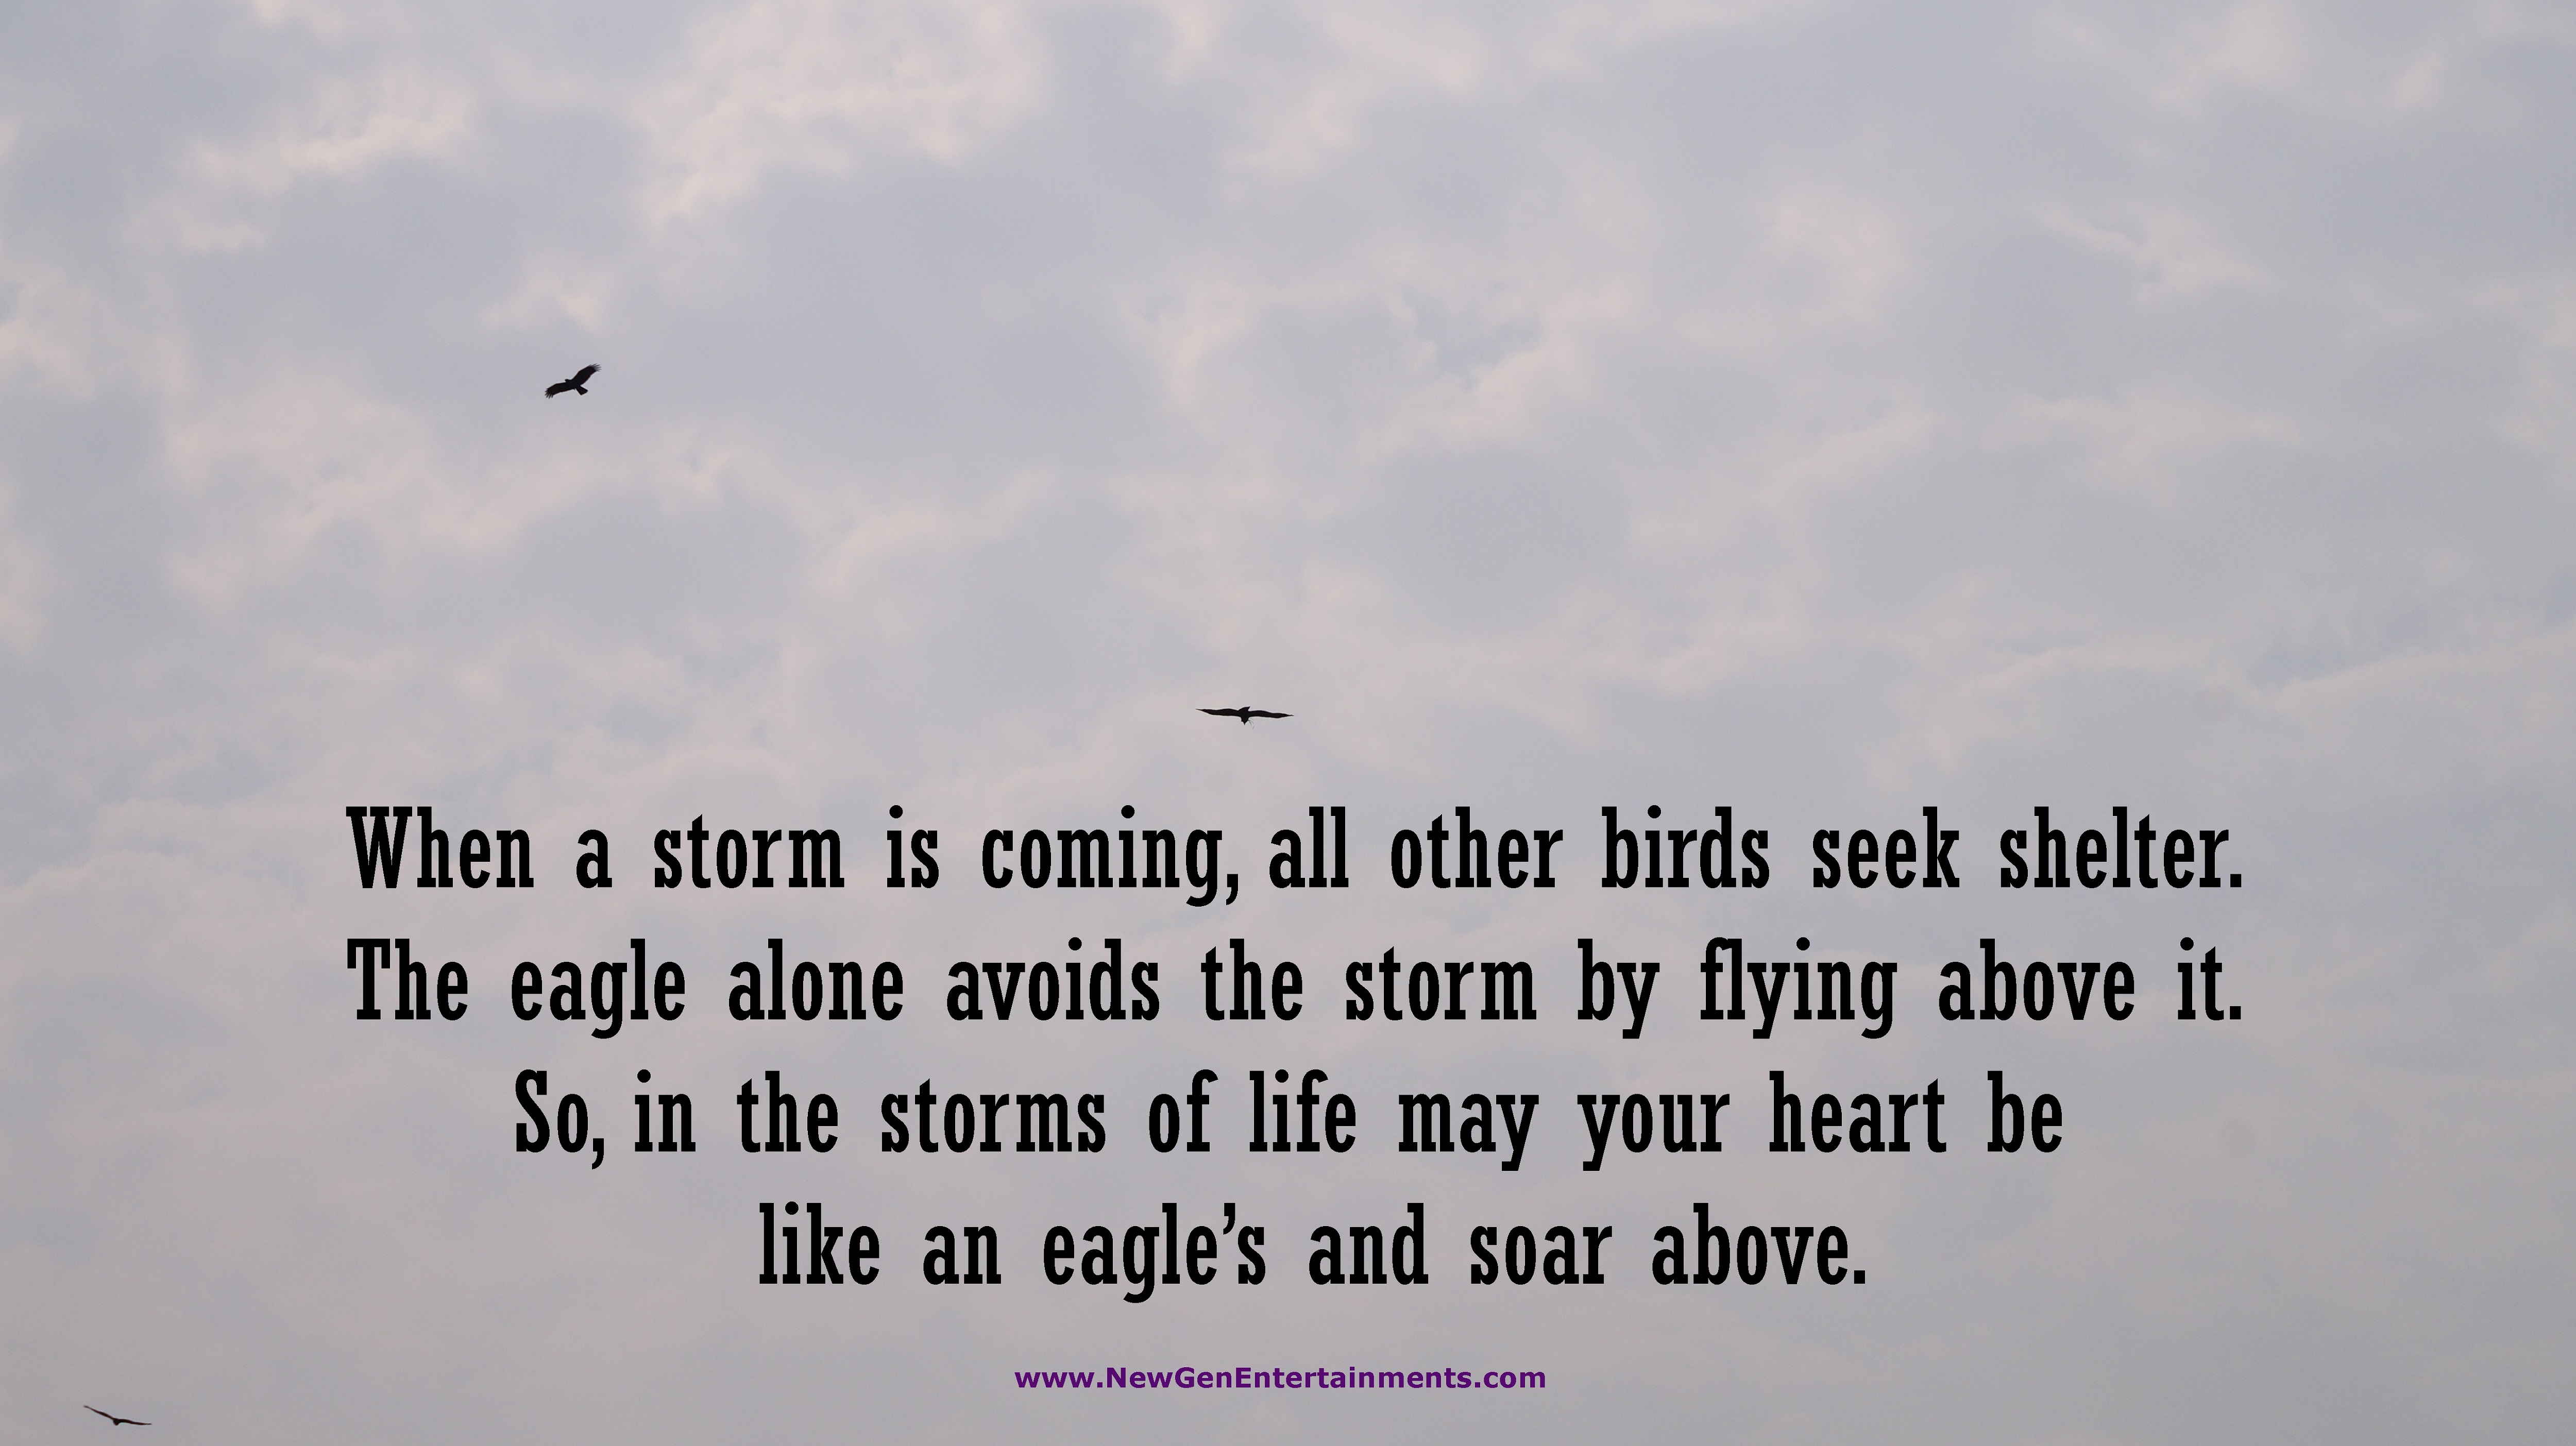 When a storm is coming, all other birds seek shelter. The eagle alone avoids the storm by flying above it.